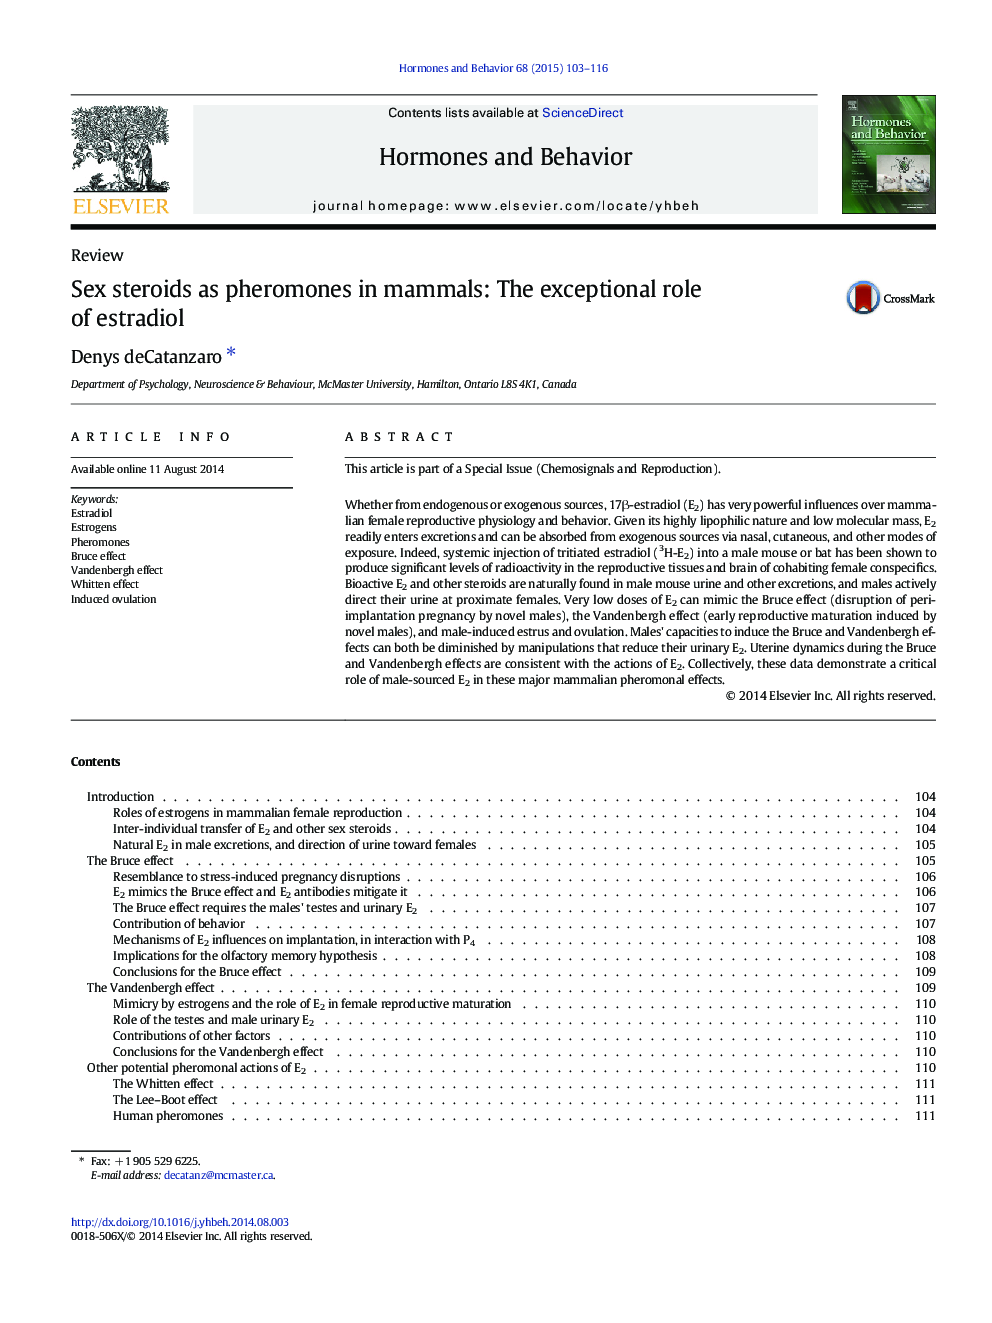 Sex steroids as pheromones in mammals: The exceptional role of estradiol